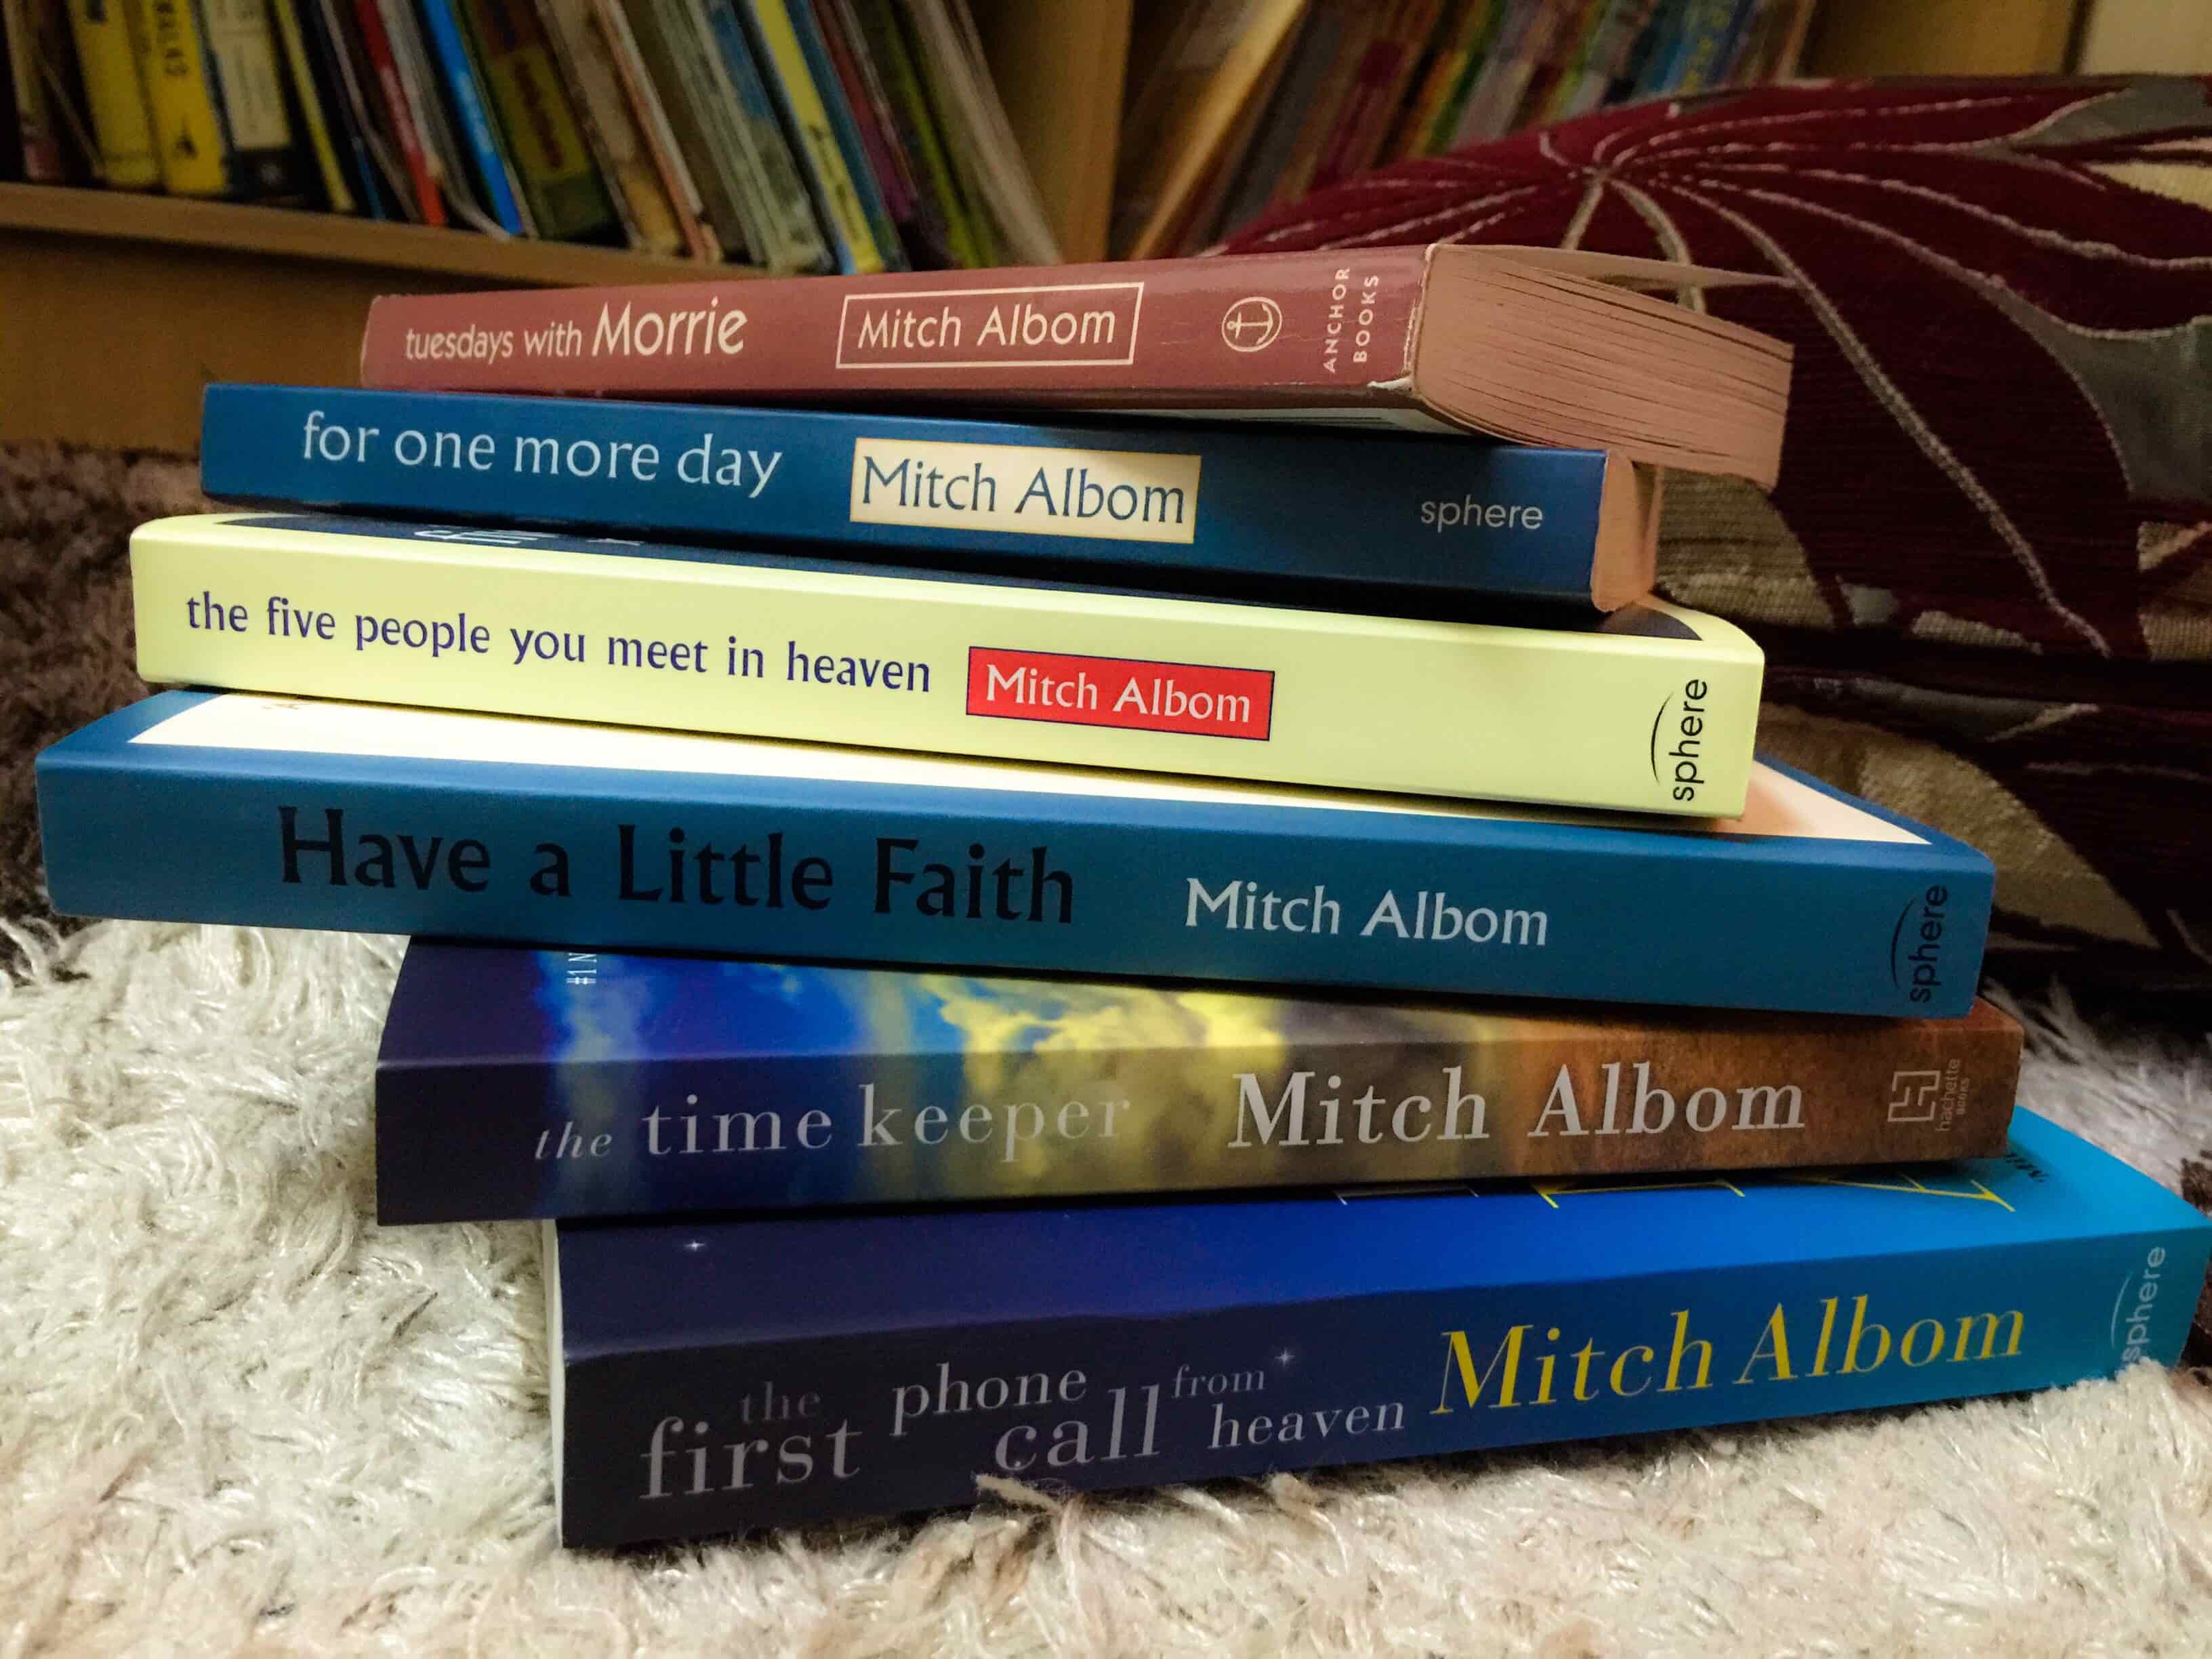 7 Books By Mitch Albom That Answer Life’s Big Questions